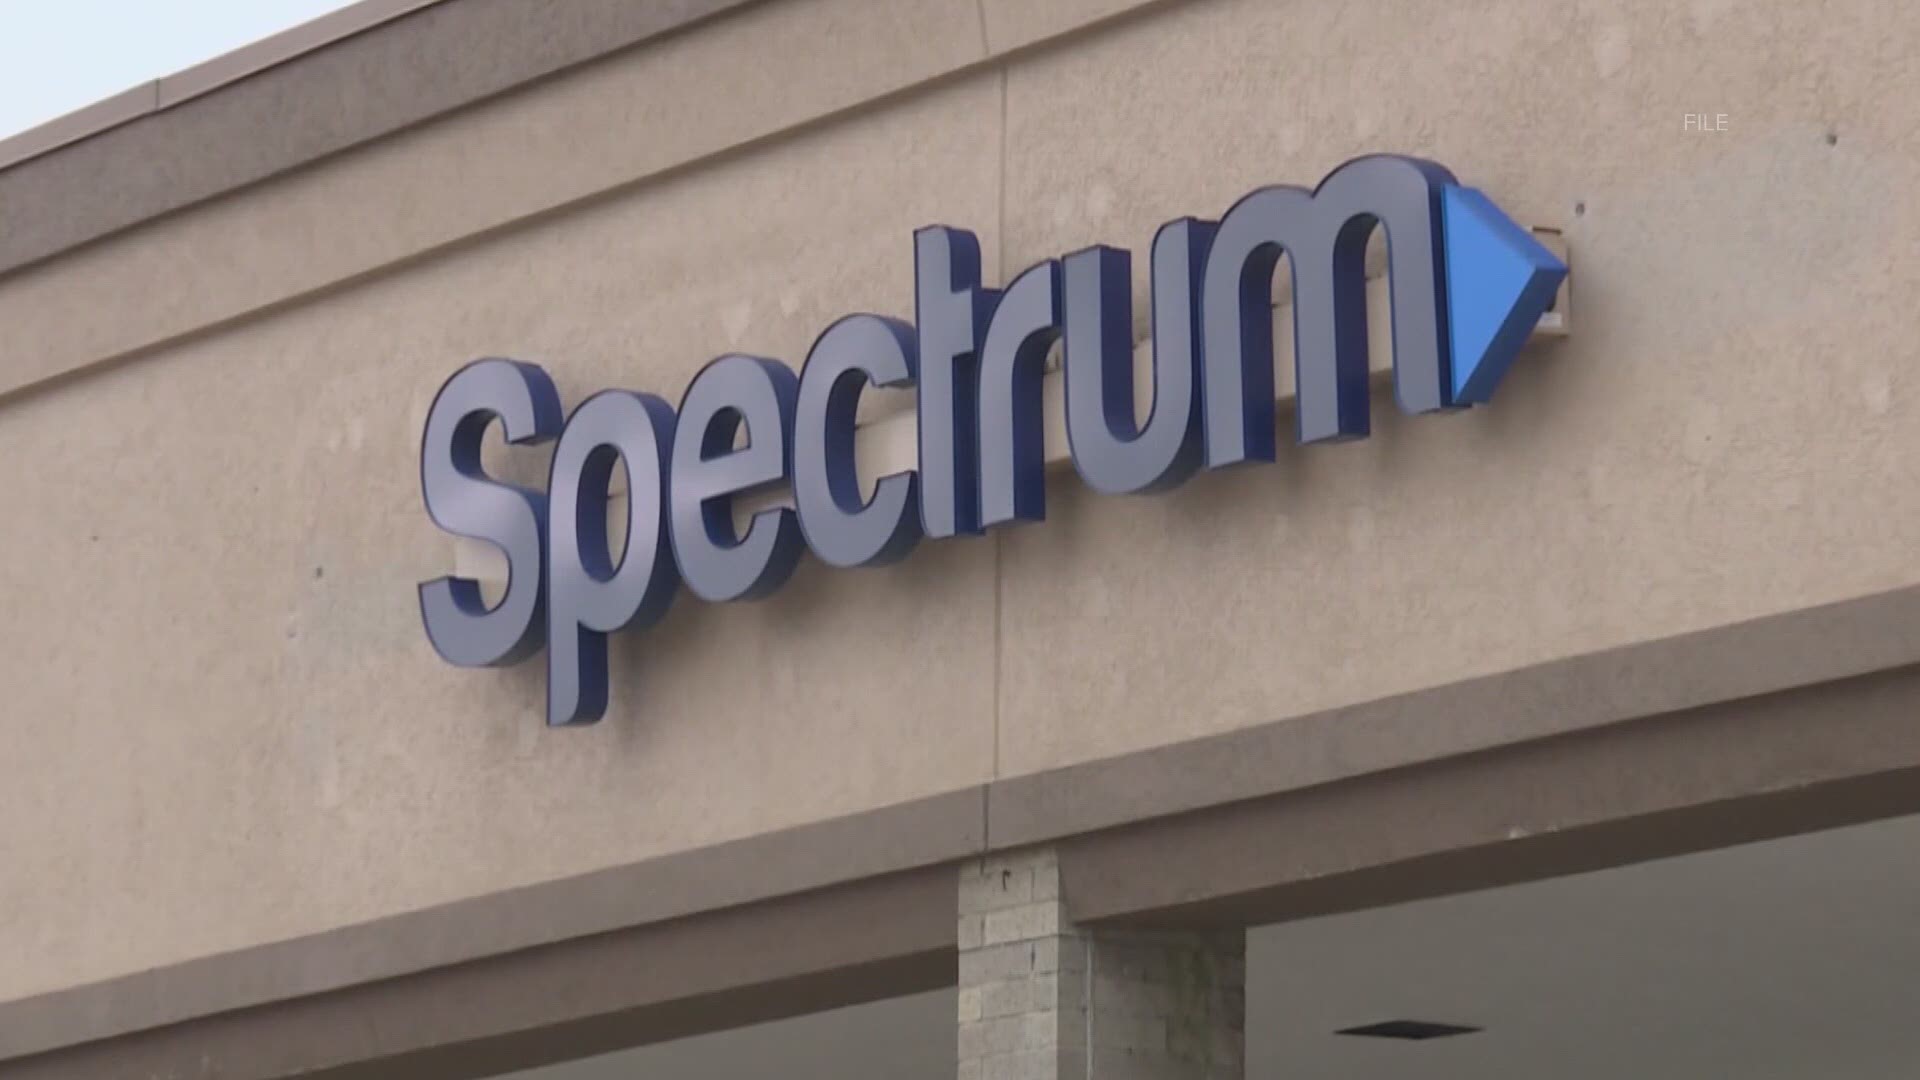 The new jobs are to focus on supporting Spectrum's cellphone service.